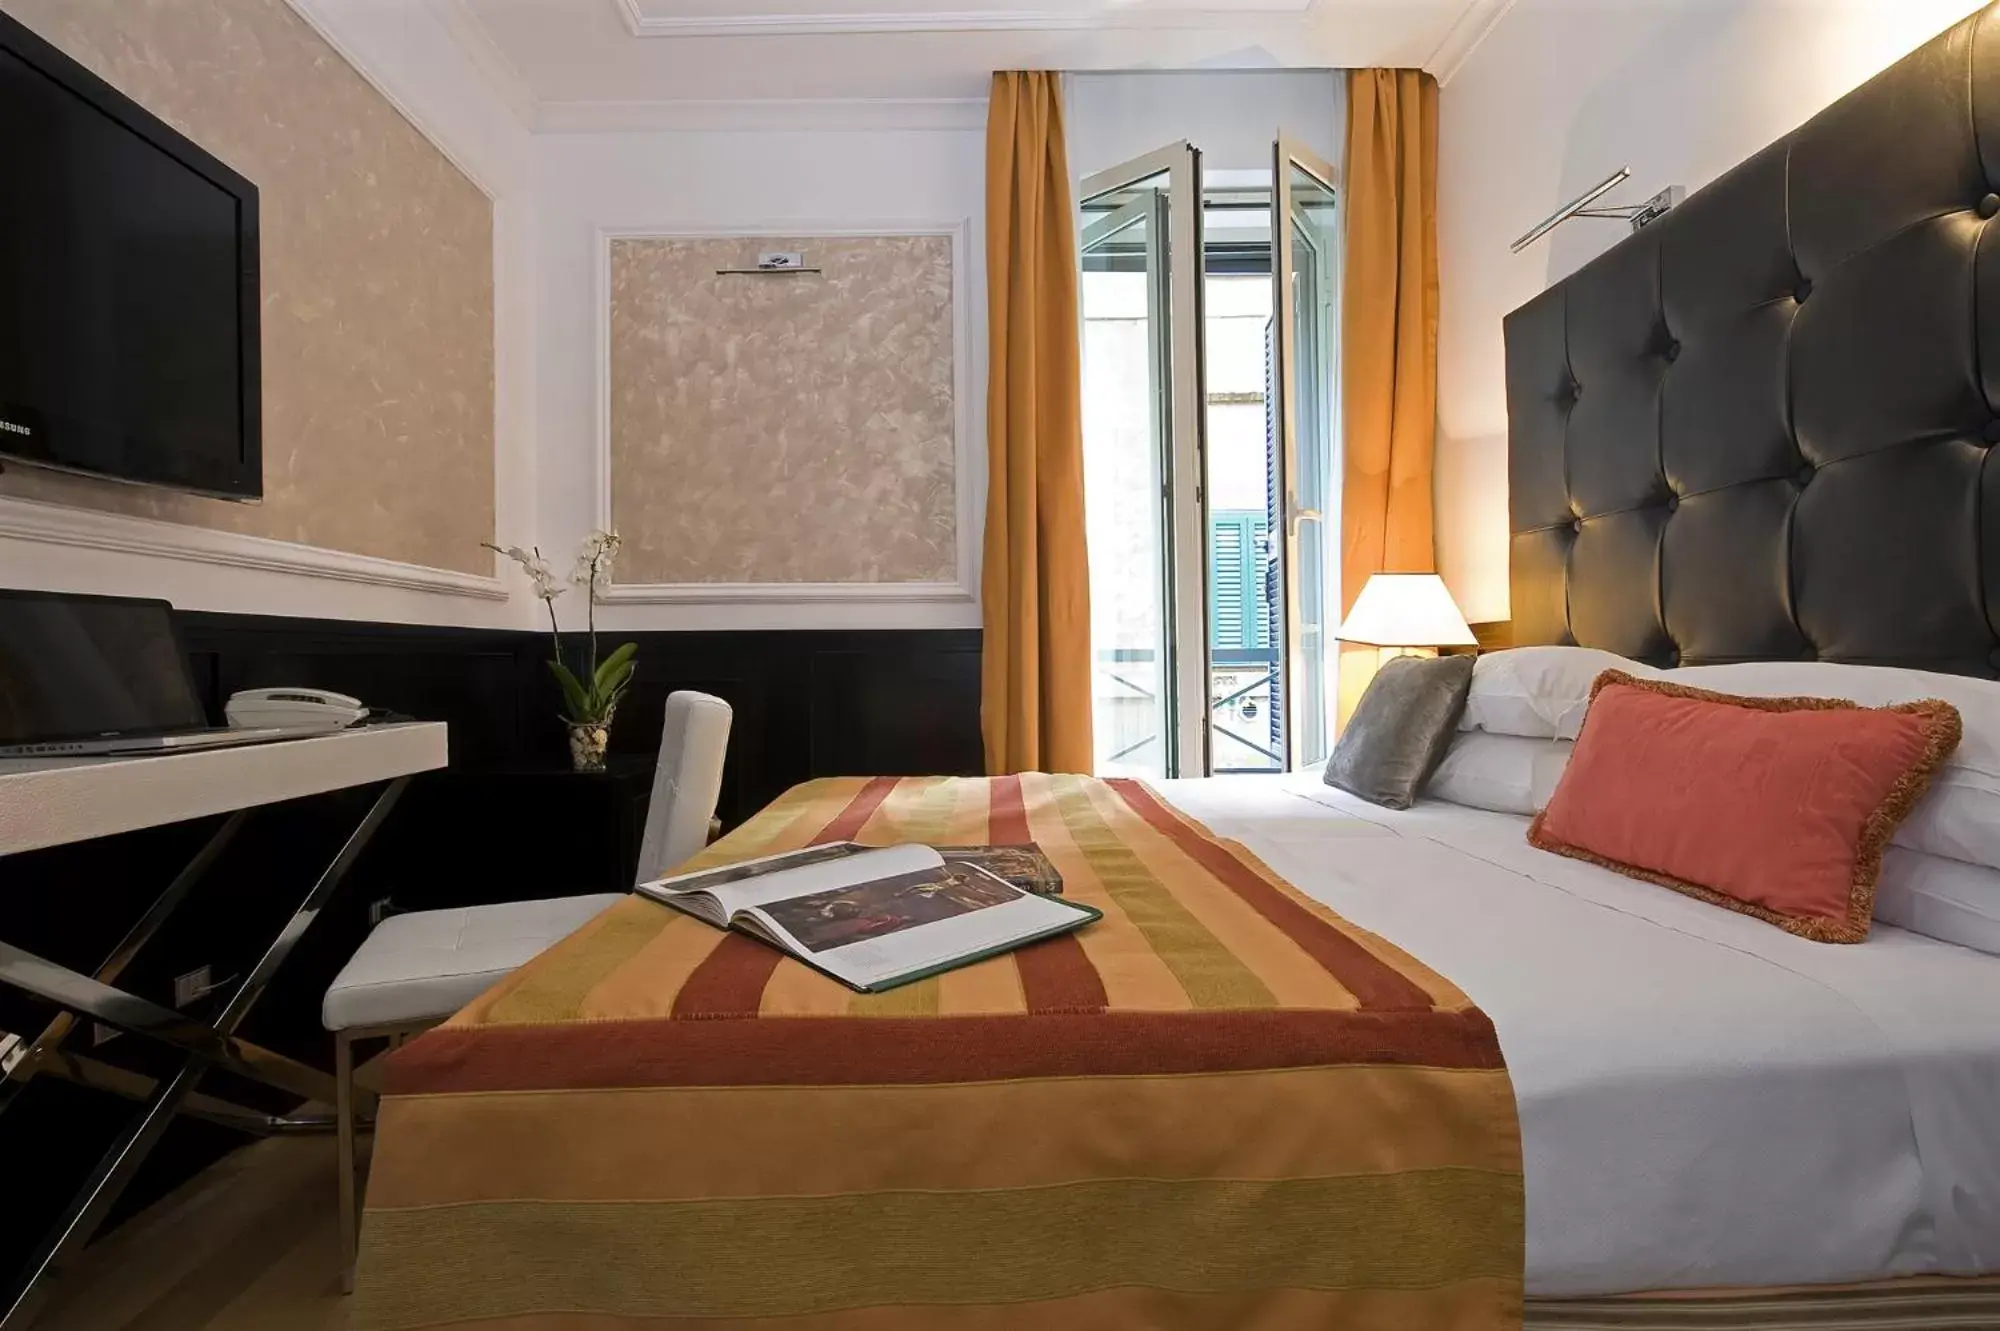 Bed in Duca d'Alba Hotel - Chateaux & Hotels Collection